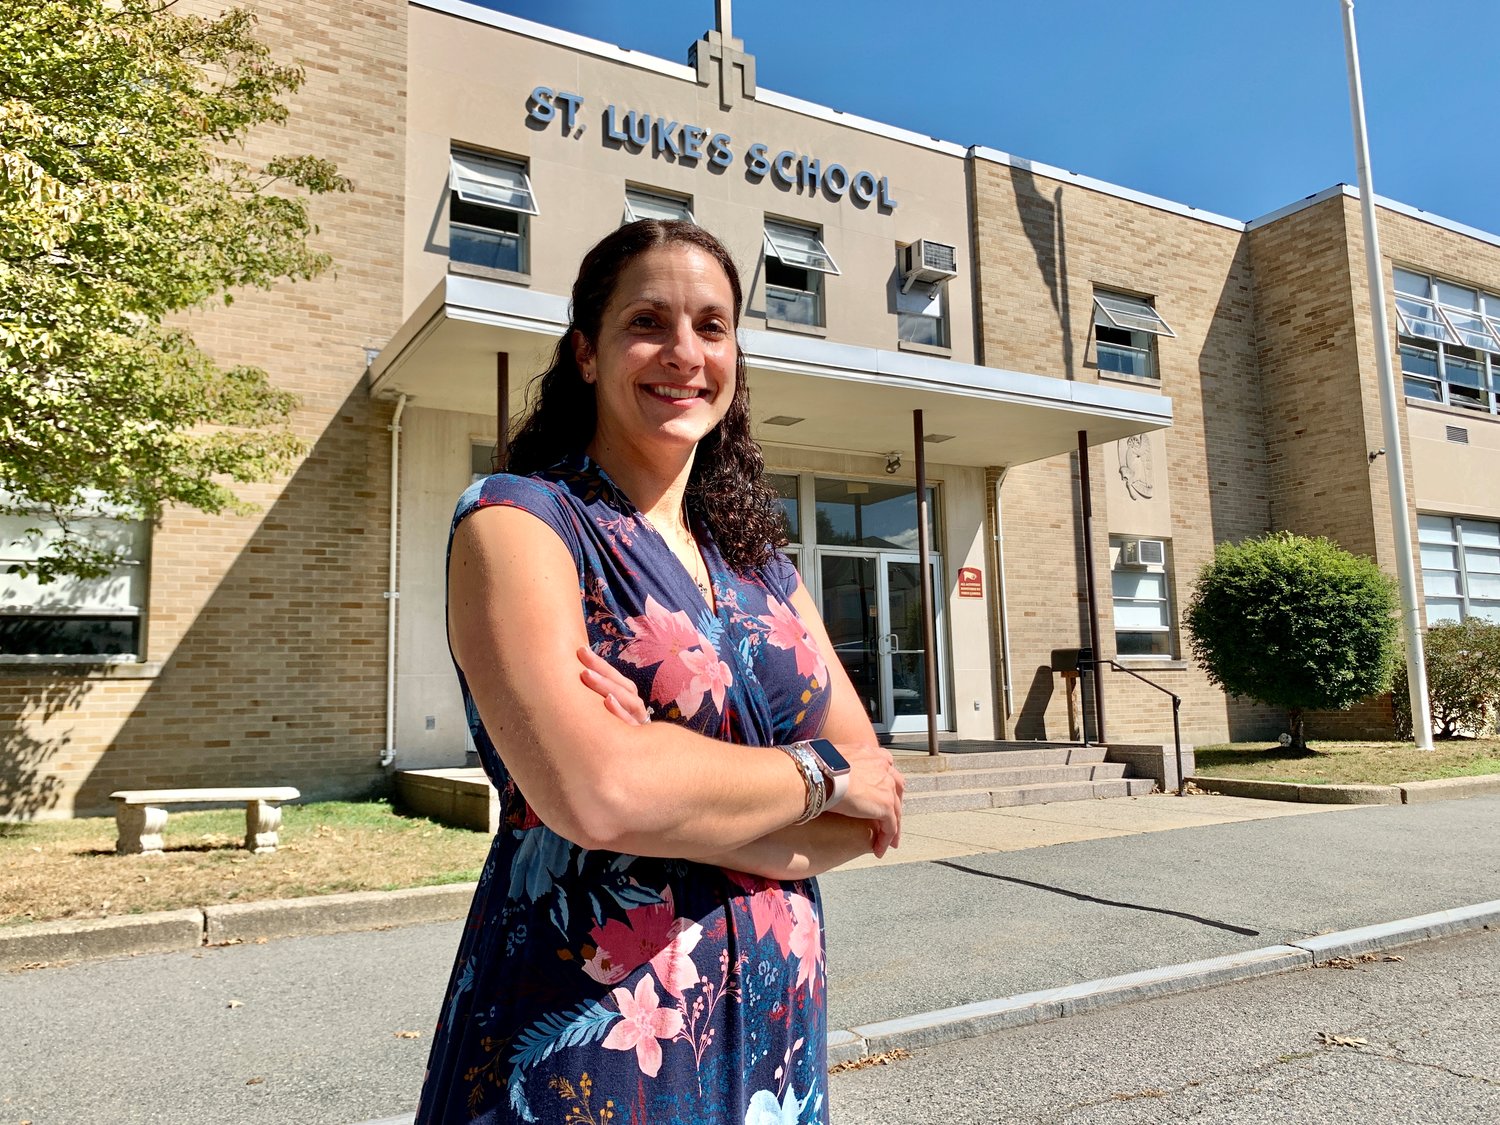 For 17 years, Nicole Varone was a key contributor at Barrington High School, first as a teacher and more recently as an assistant principal. This month she accepted a new job: Principal at St. Luke's School.